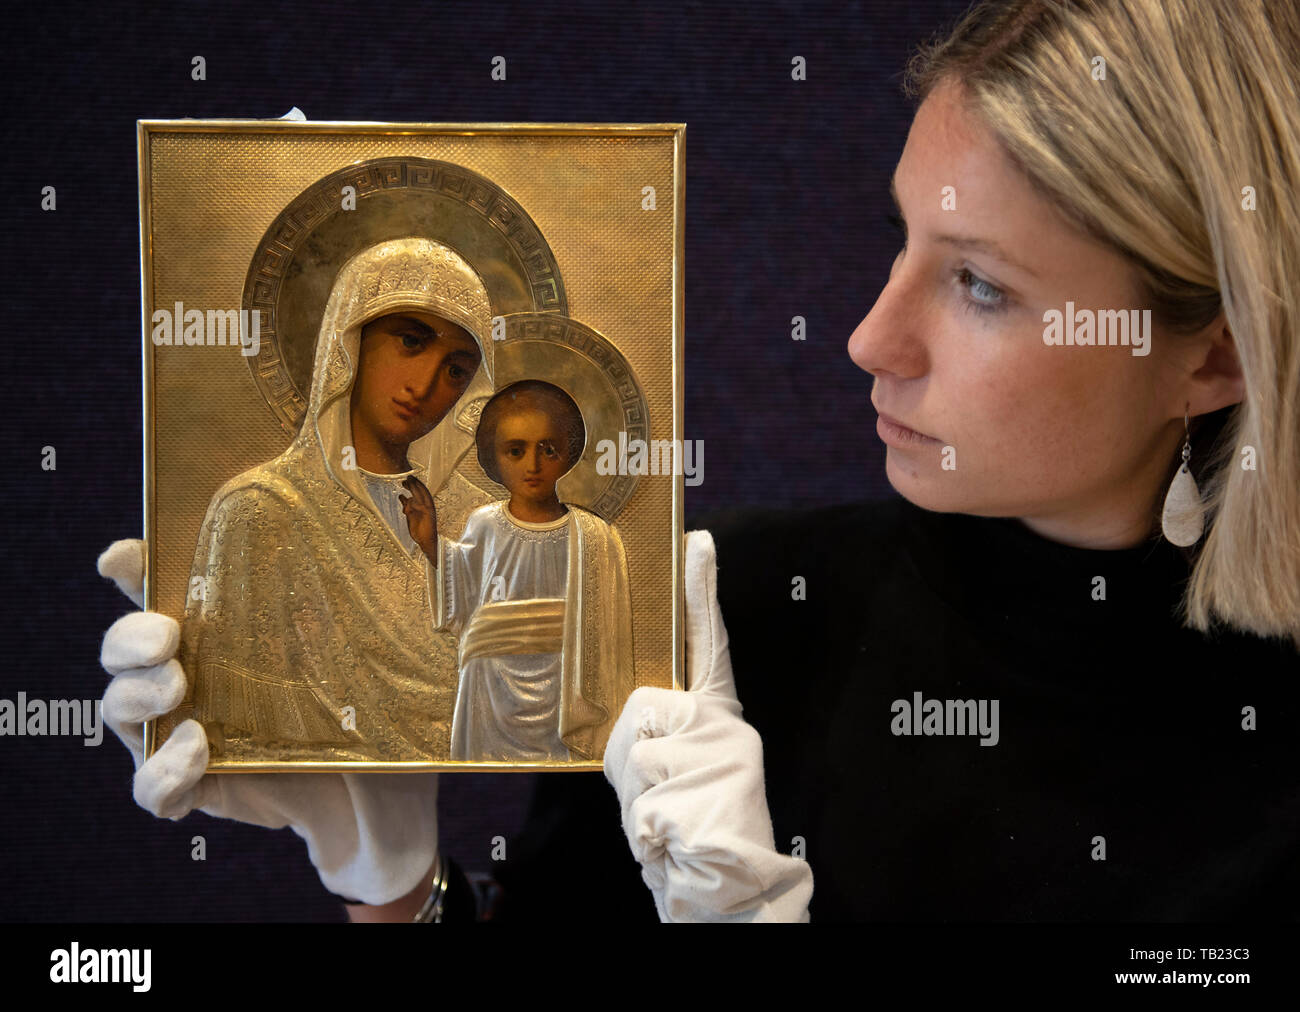 Bonhams, New Bond Street, London, UK. 29th May 2019. Preview of The Russian Sale, taking place on 5th June 2019. Image: The Mother of God of Kazan, Morozov, St Petersburg. Estimate £5,000-7,000. Credit: Malcolm Park/Alamy Live News Stock Photo